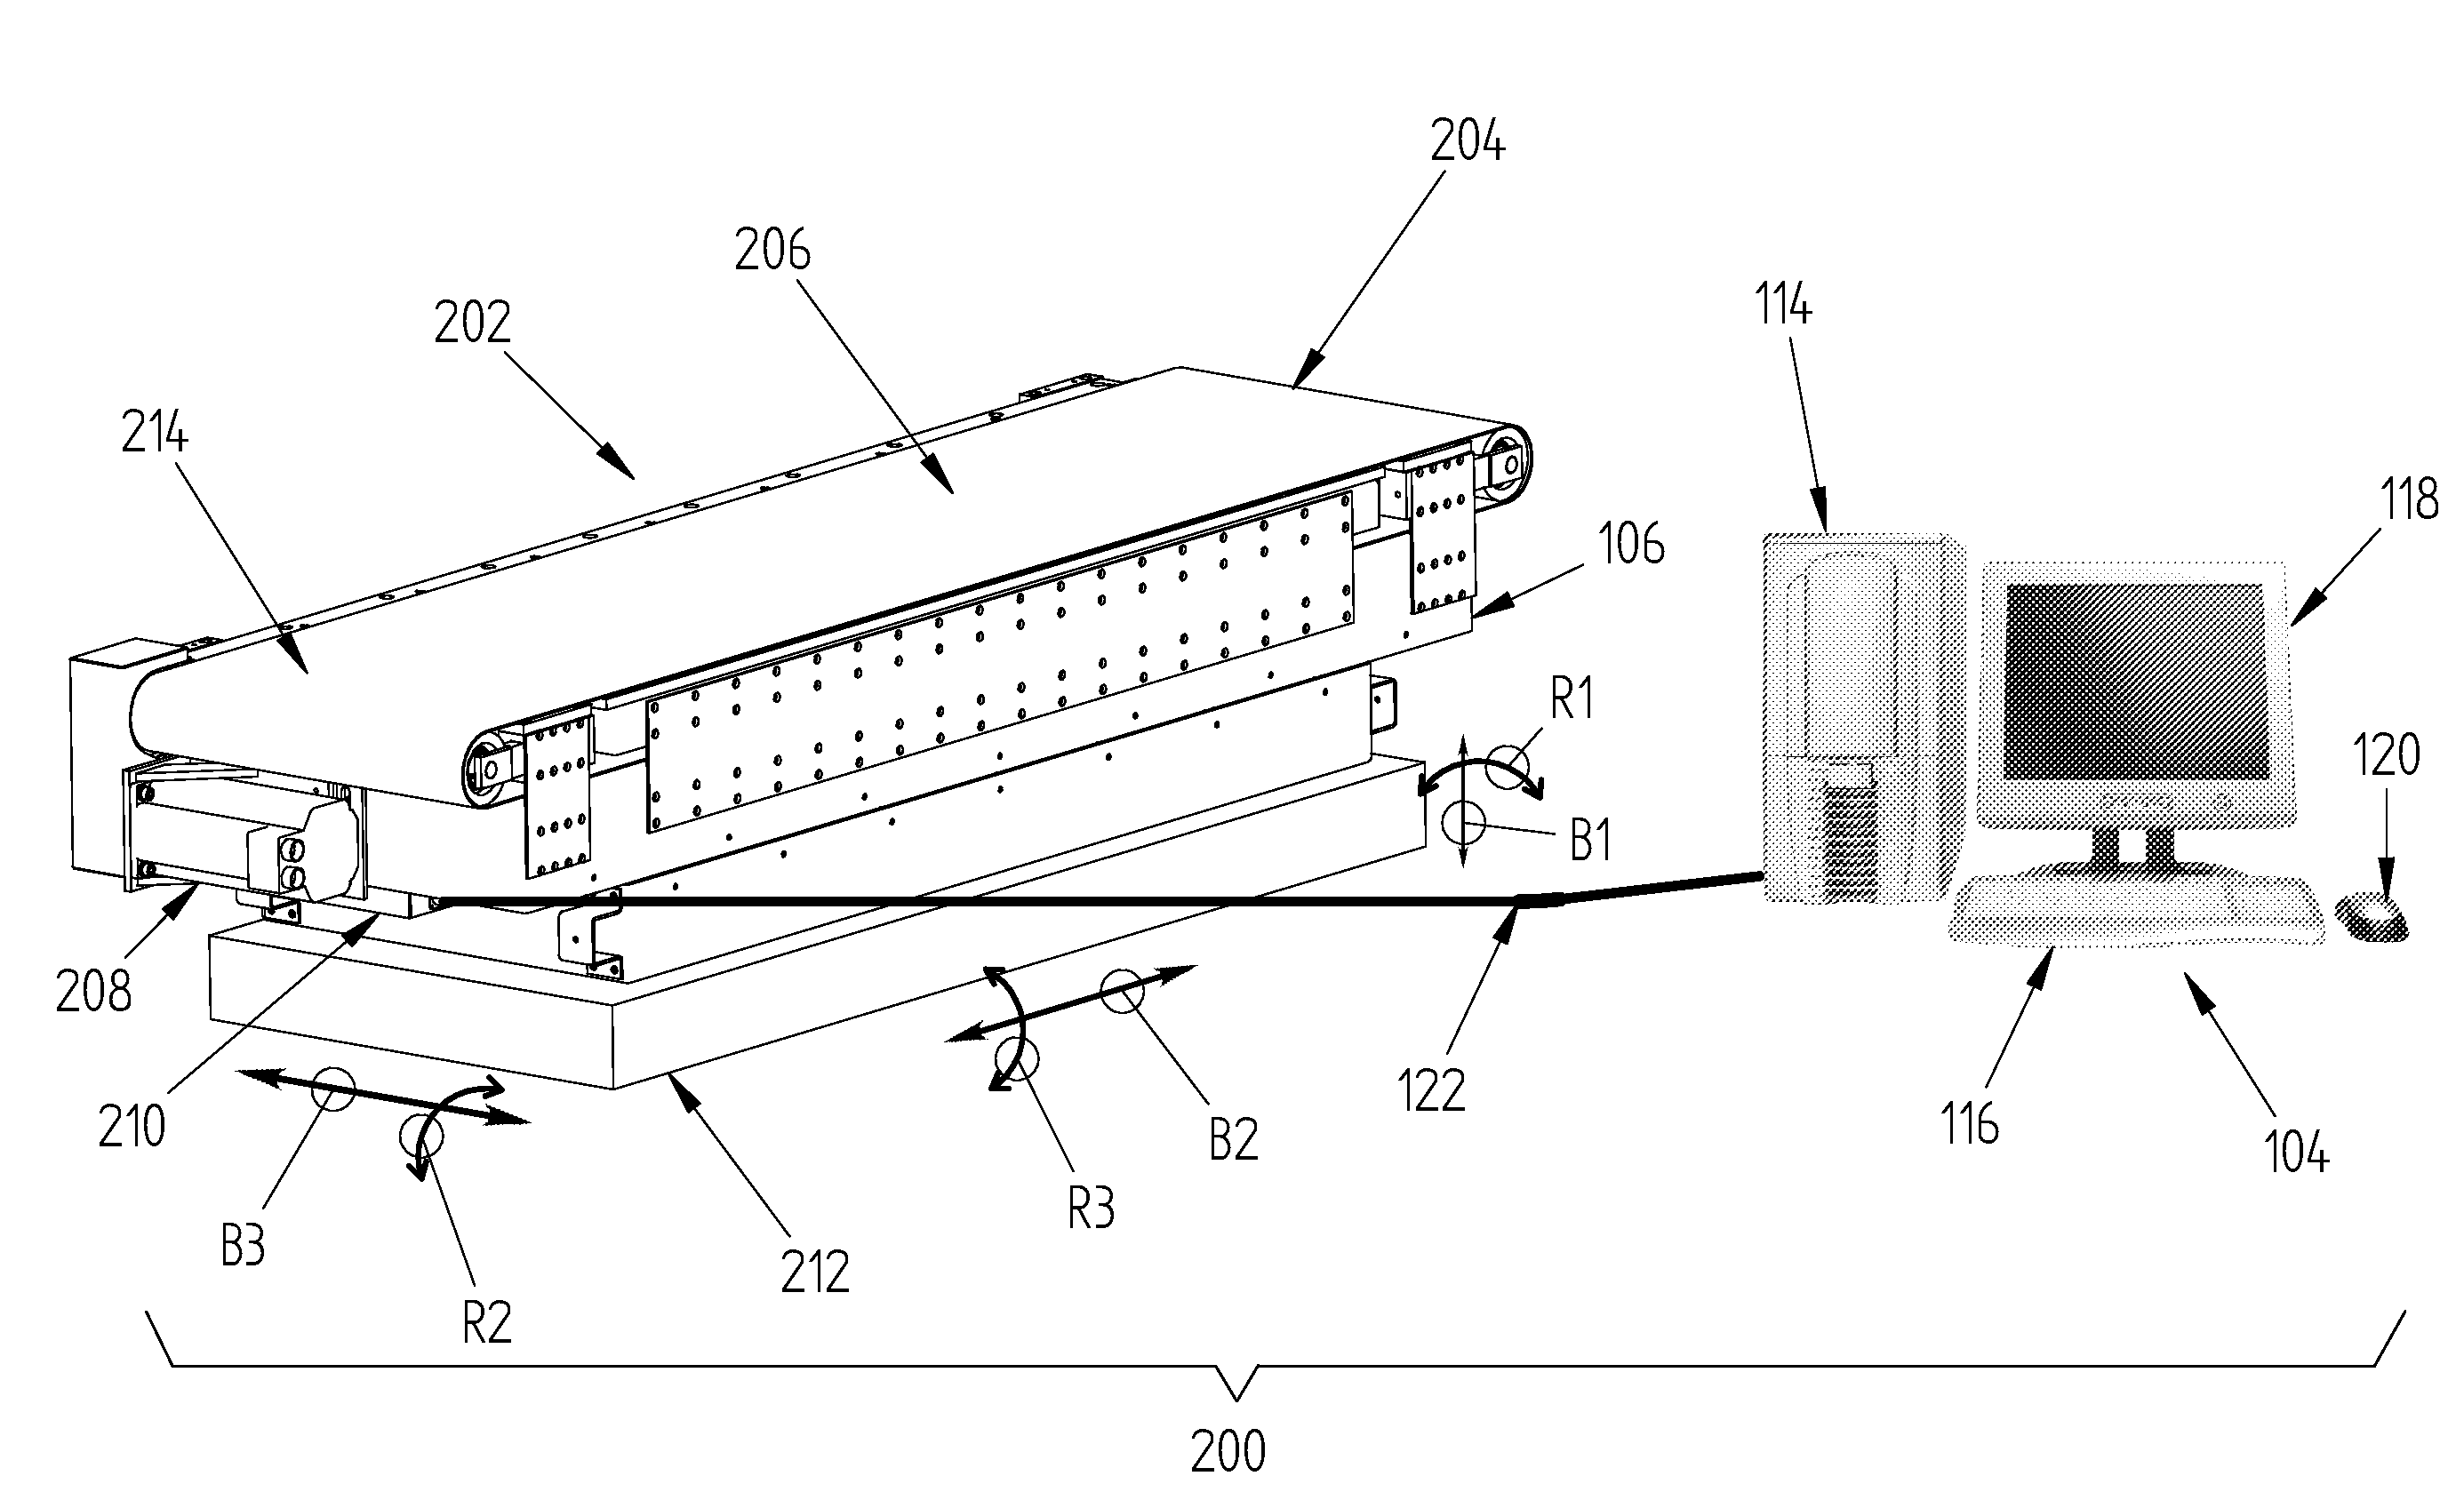 Force and/or Motion Measurement System Having Inertial Compensation and Method Thereof